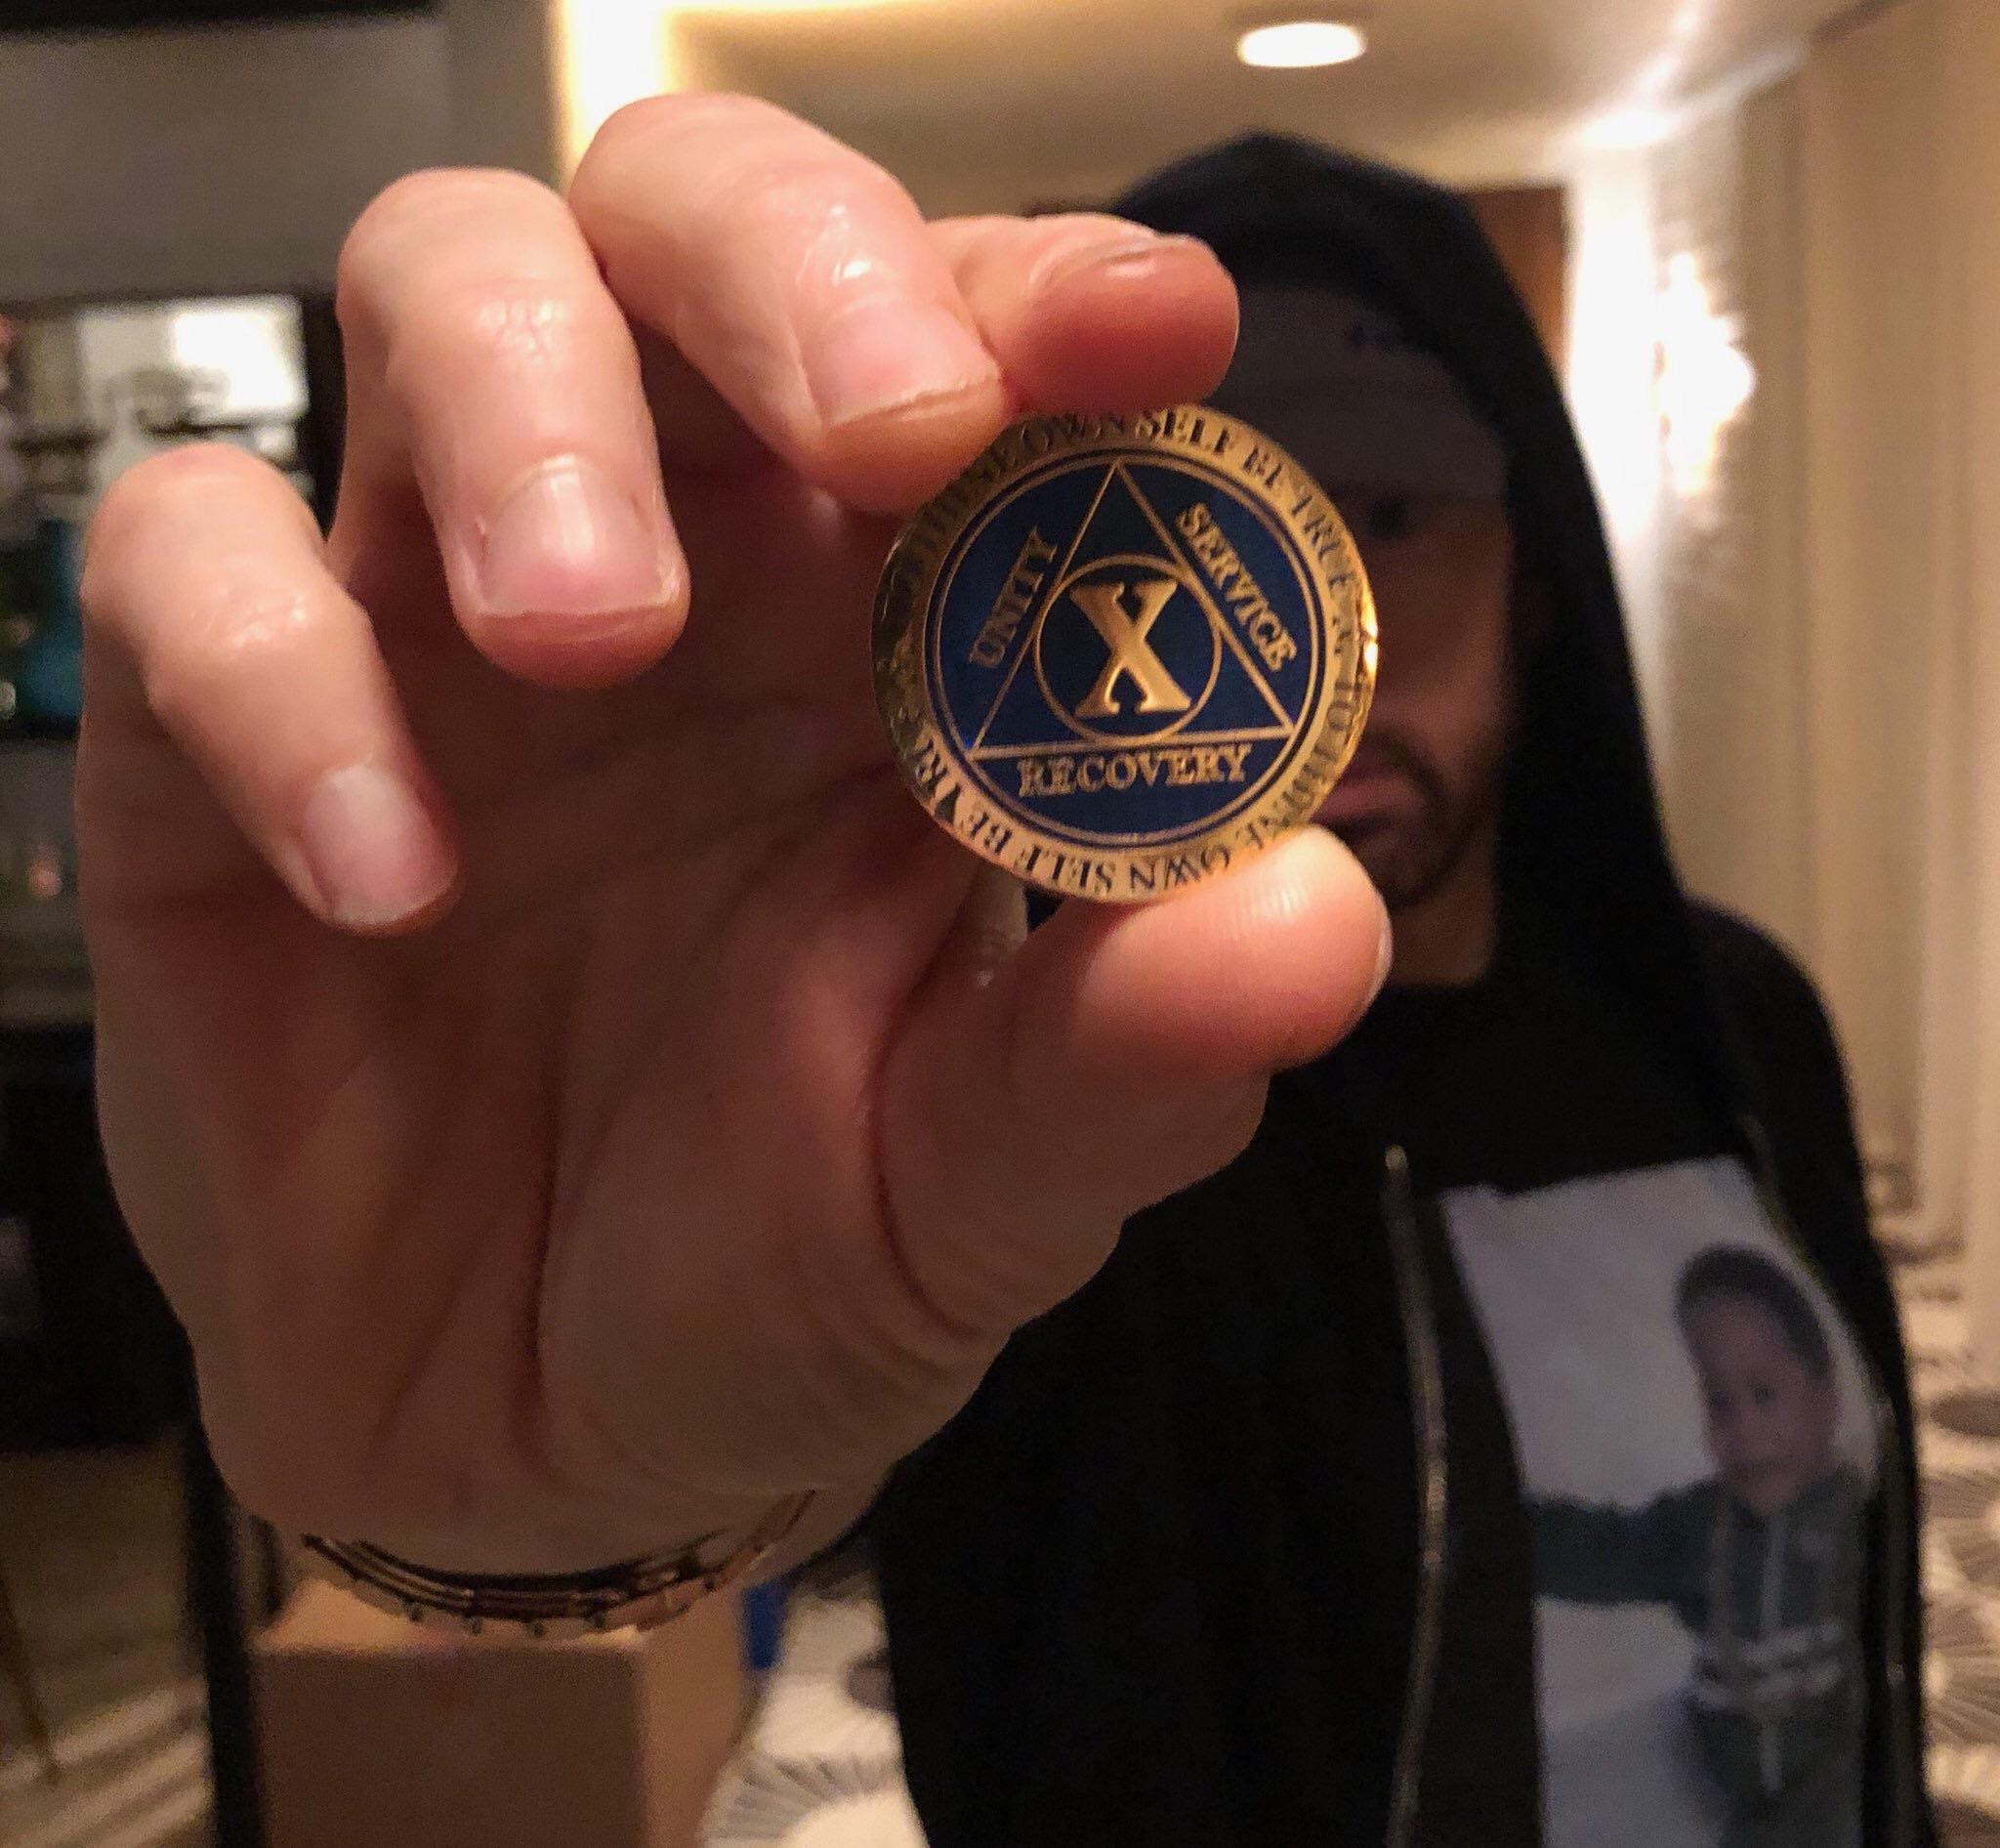 Eminem with his sobriety coin. He will soon be 11 years sober.